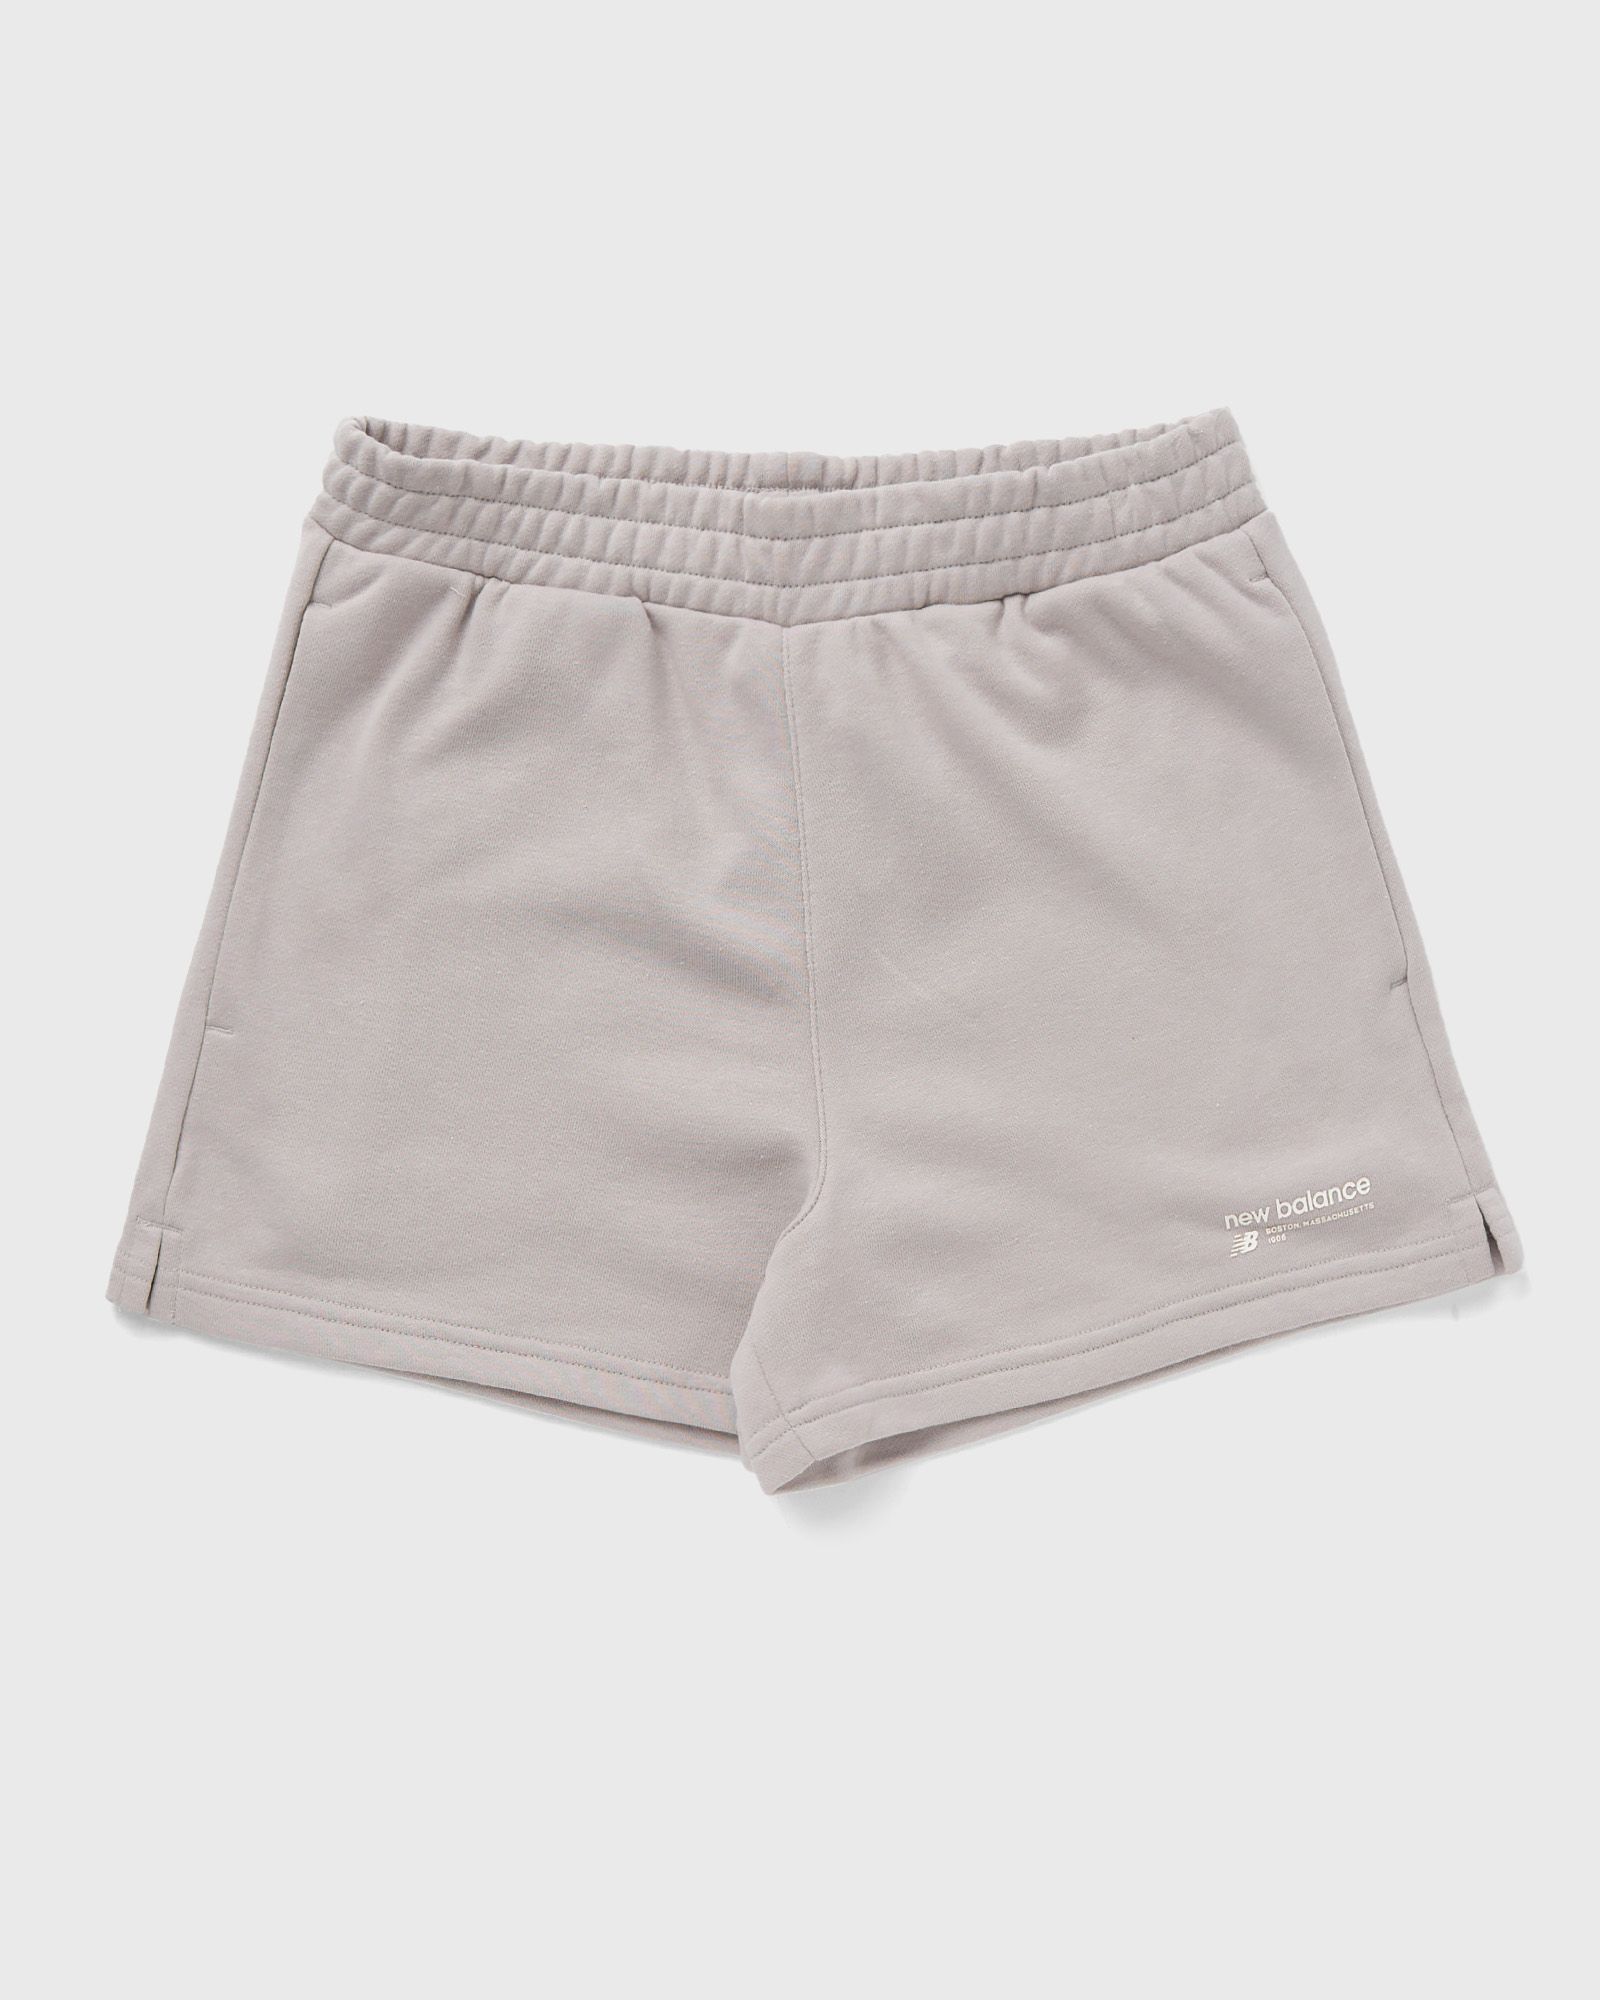 New Balance - linear heritage french terry short women casual shorts grey in größe:l